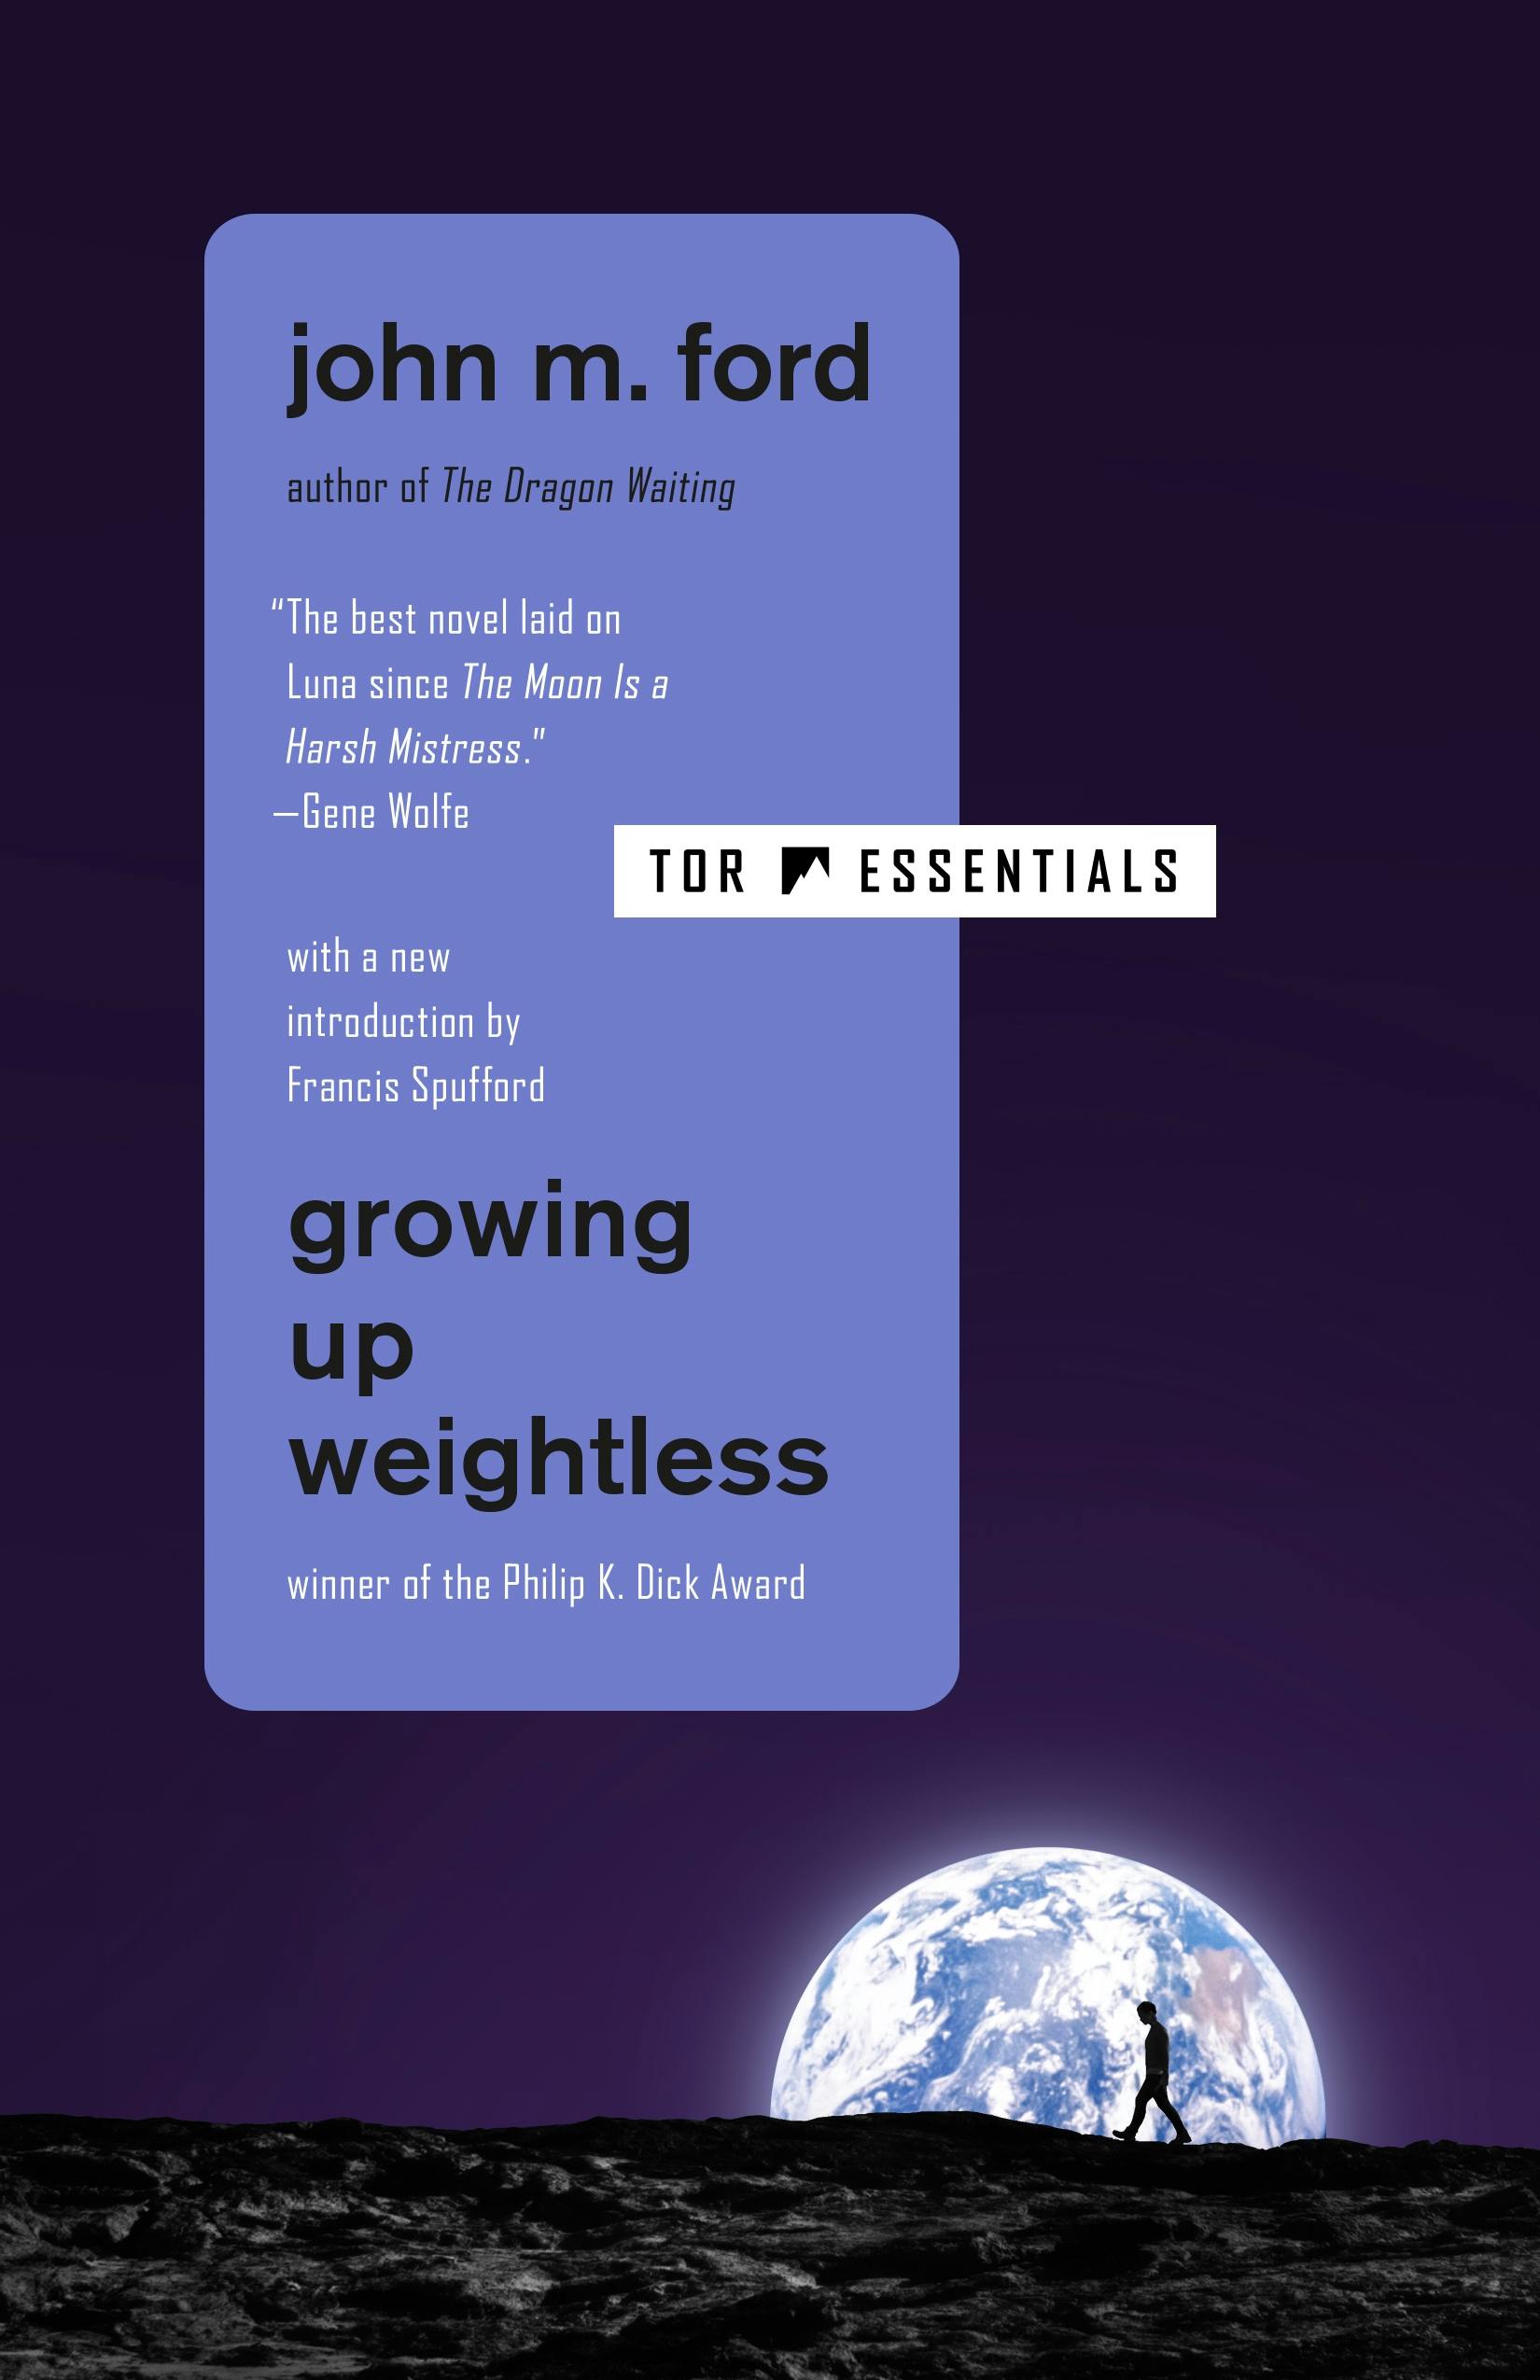 Cover for the book titled as: Growing Up Weightless